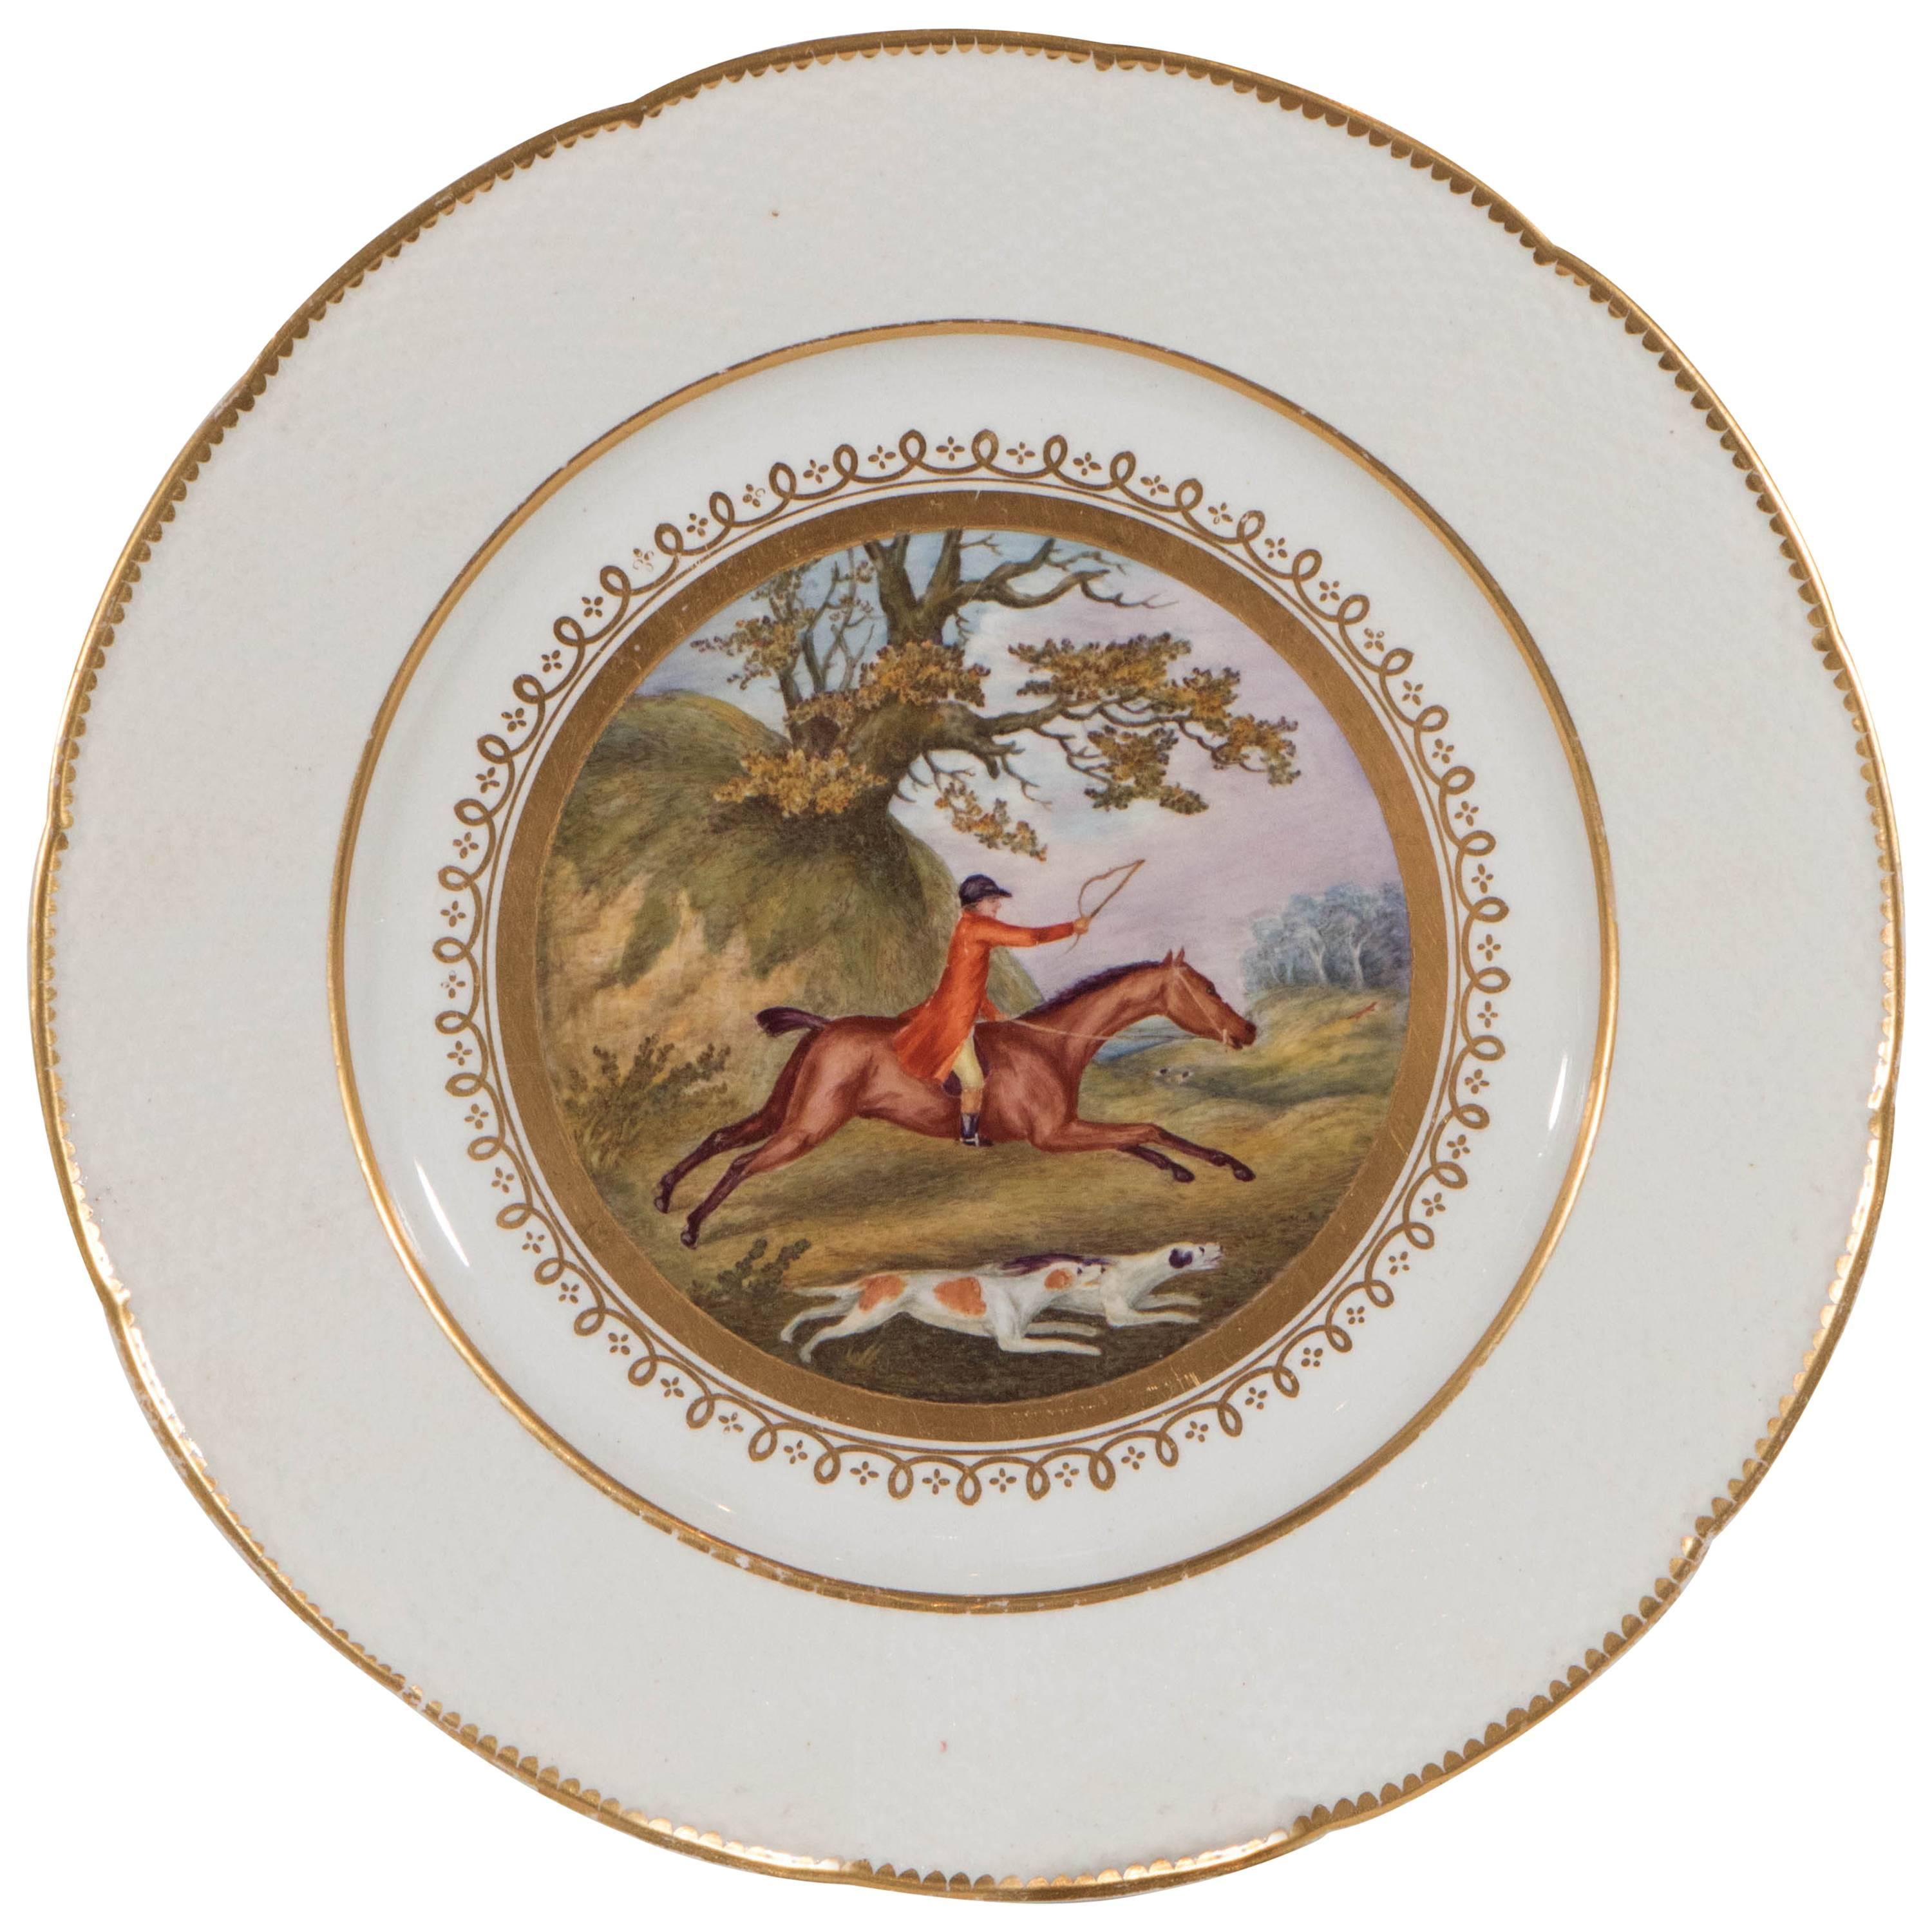 Fox Hunt Scene Hand-Painted on an Antique English Plate Made circa 1815